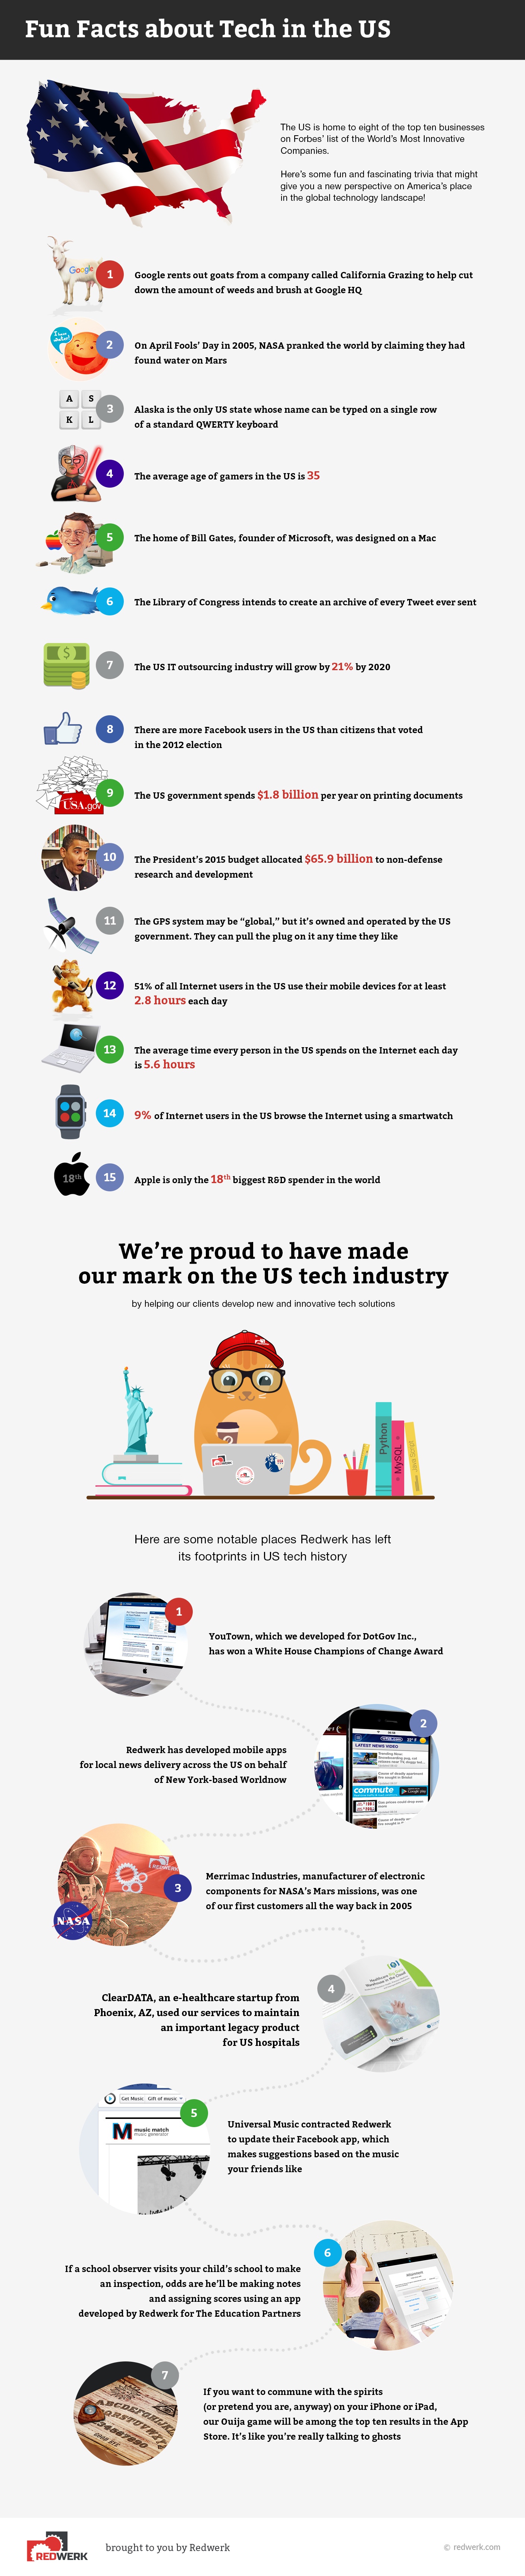 Interesting Facts about the USA Tech Industry Infographic